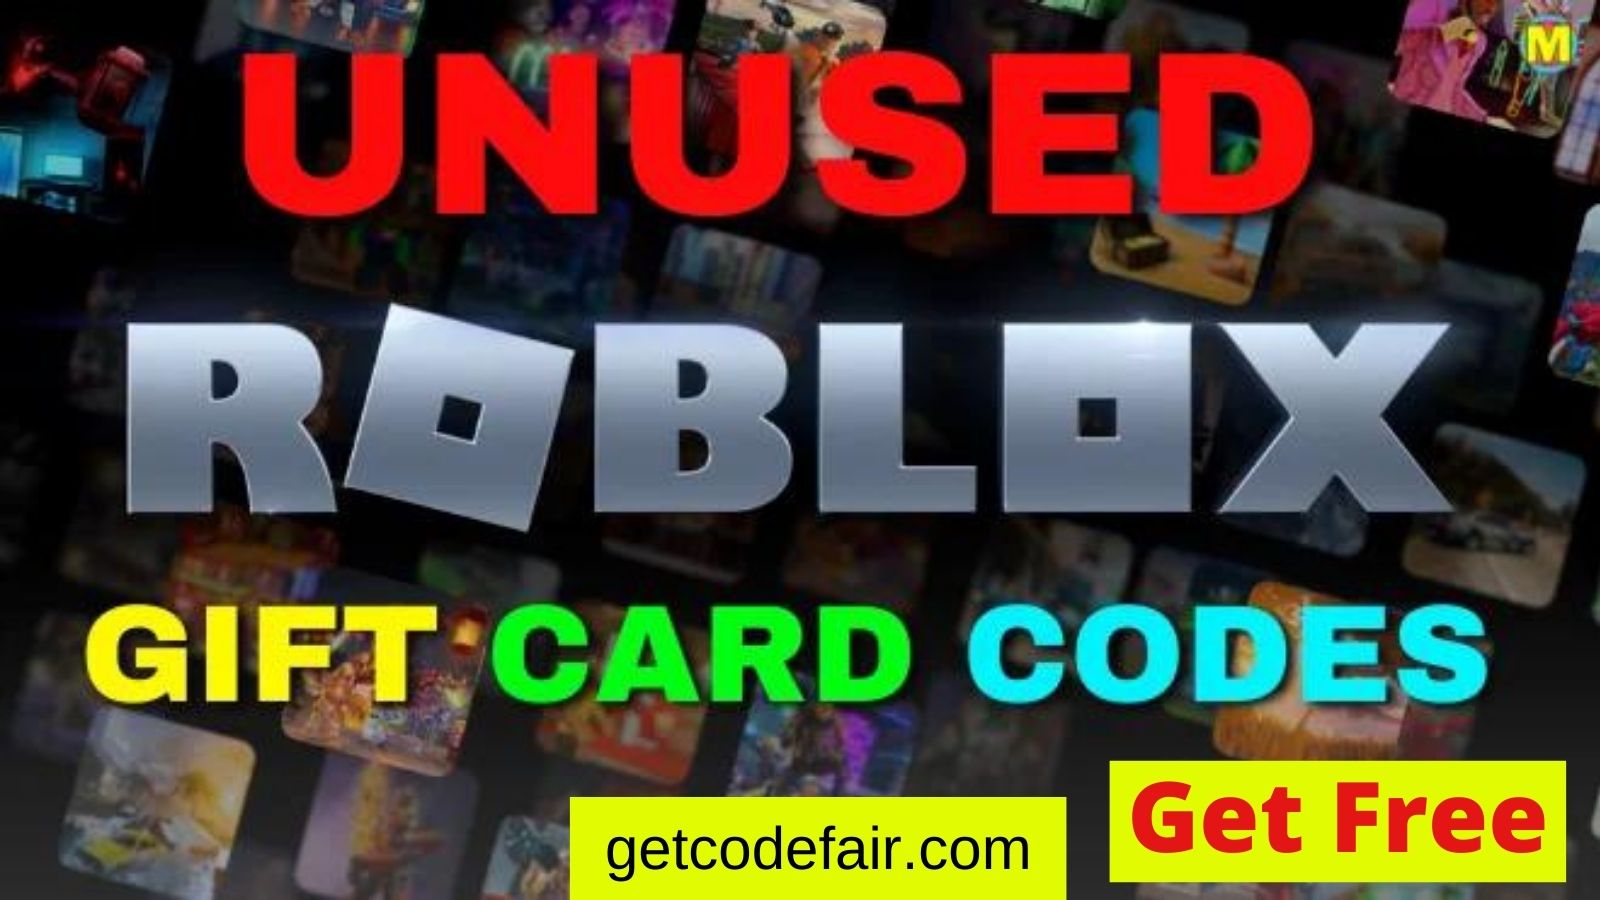 Pamela Rowles on X: Get Free Unused Roblox Gift Card Codes 2022  How To  Get Free Unused Roblox Gift Card Codes without human verification  #RobloxDev #ROBLOX #giftcard #robux #freegames #freerobux #robloxgiftcard